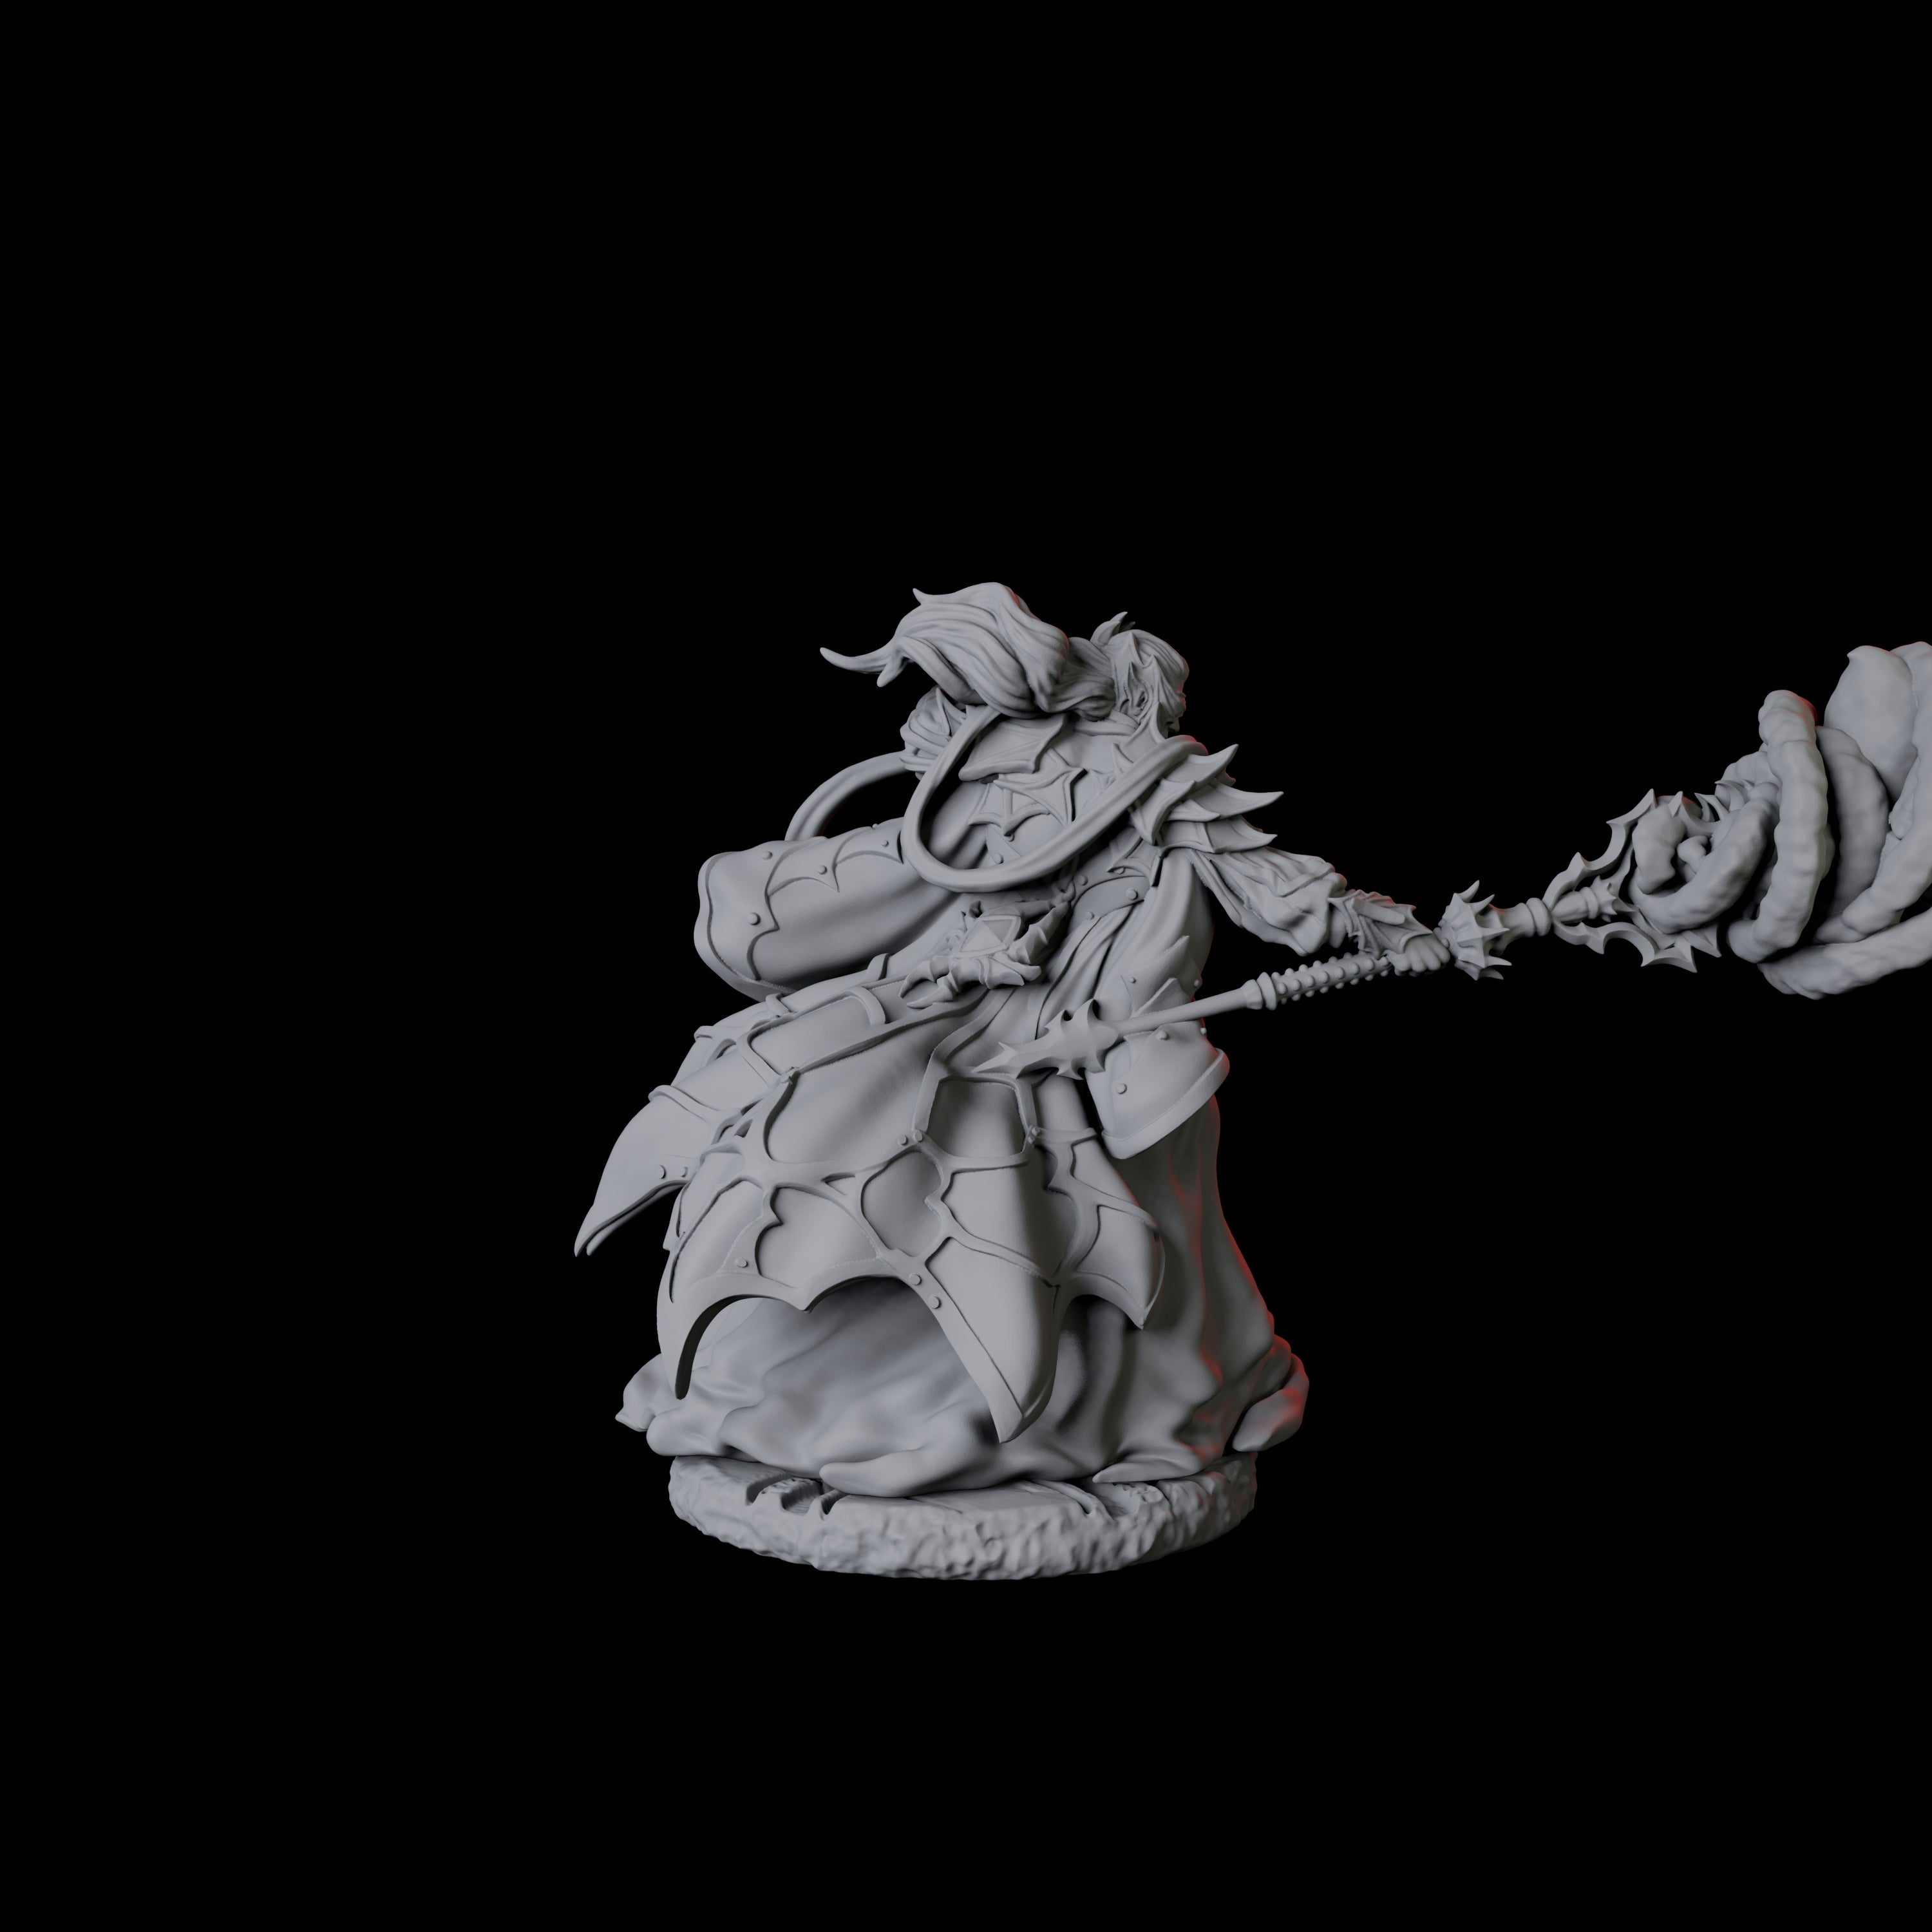 Spider Mage Miniature for Dungeons and Dragons, Pathfinder or other TTRPGs